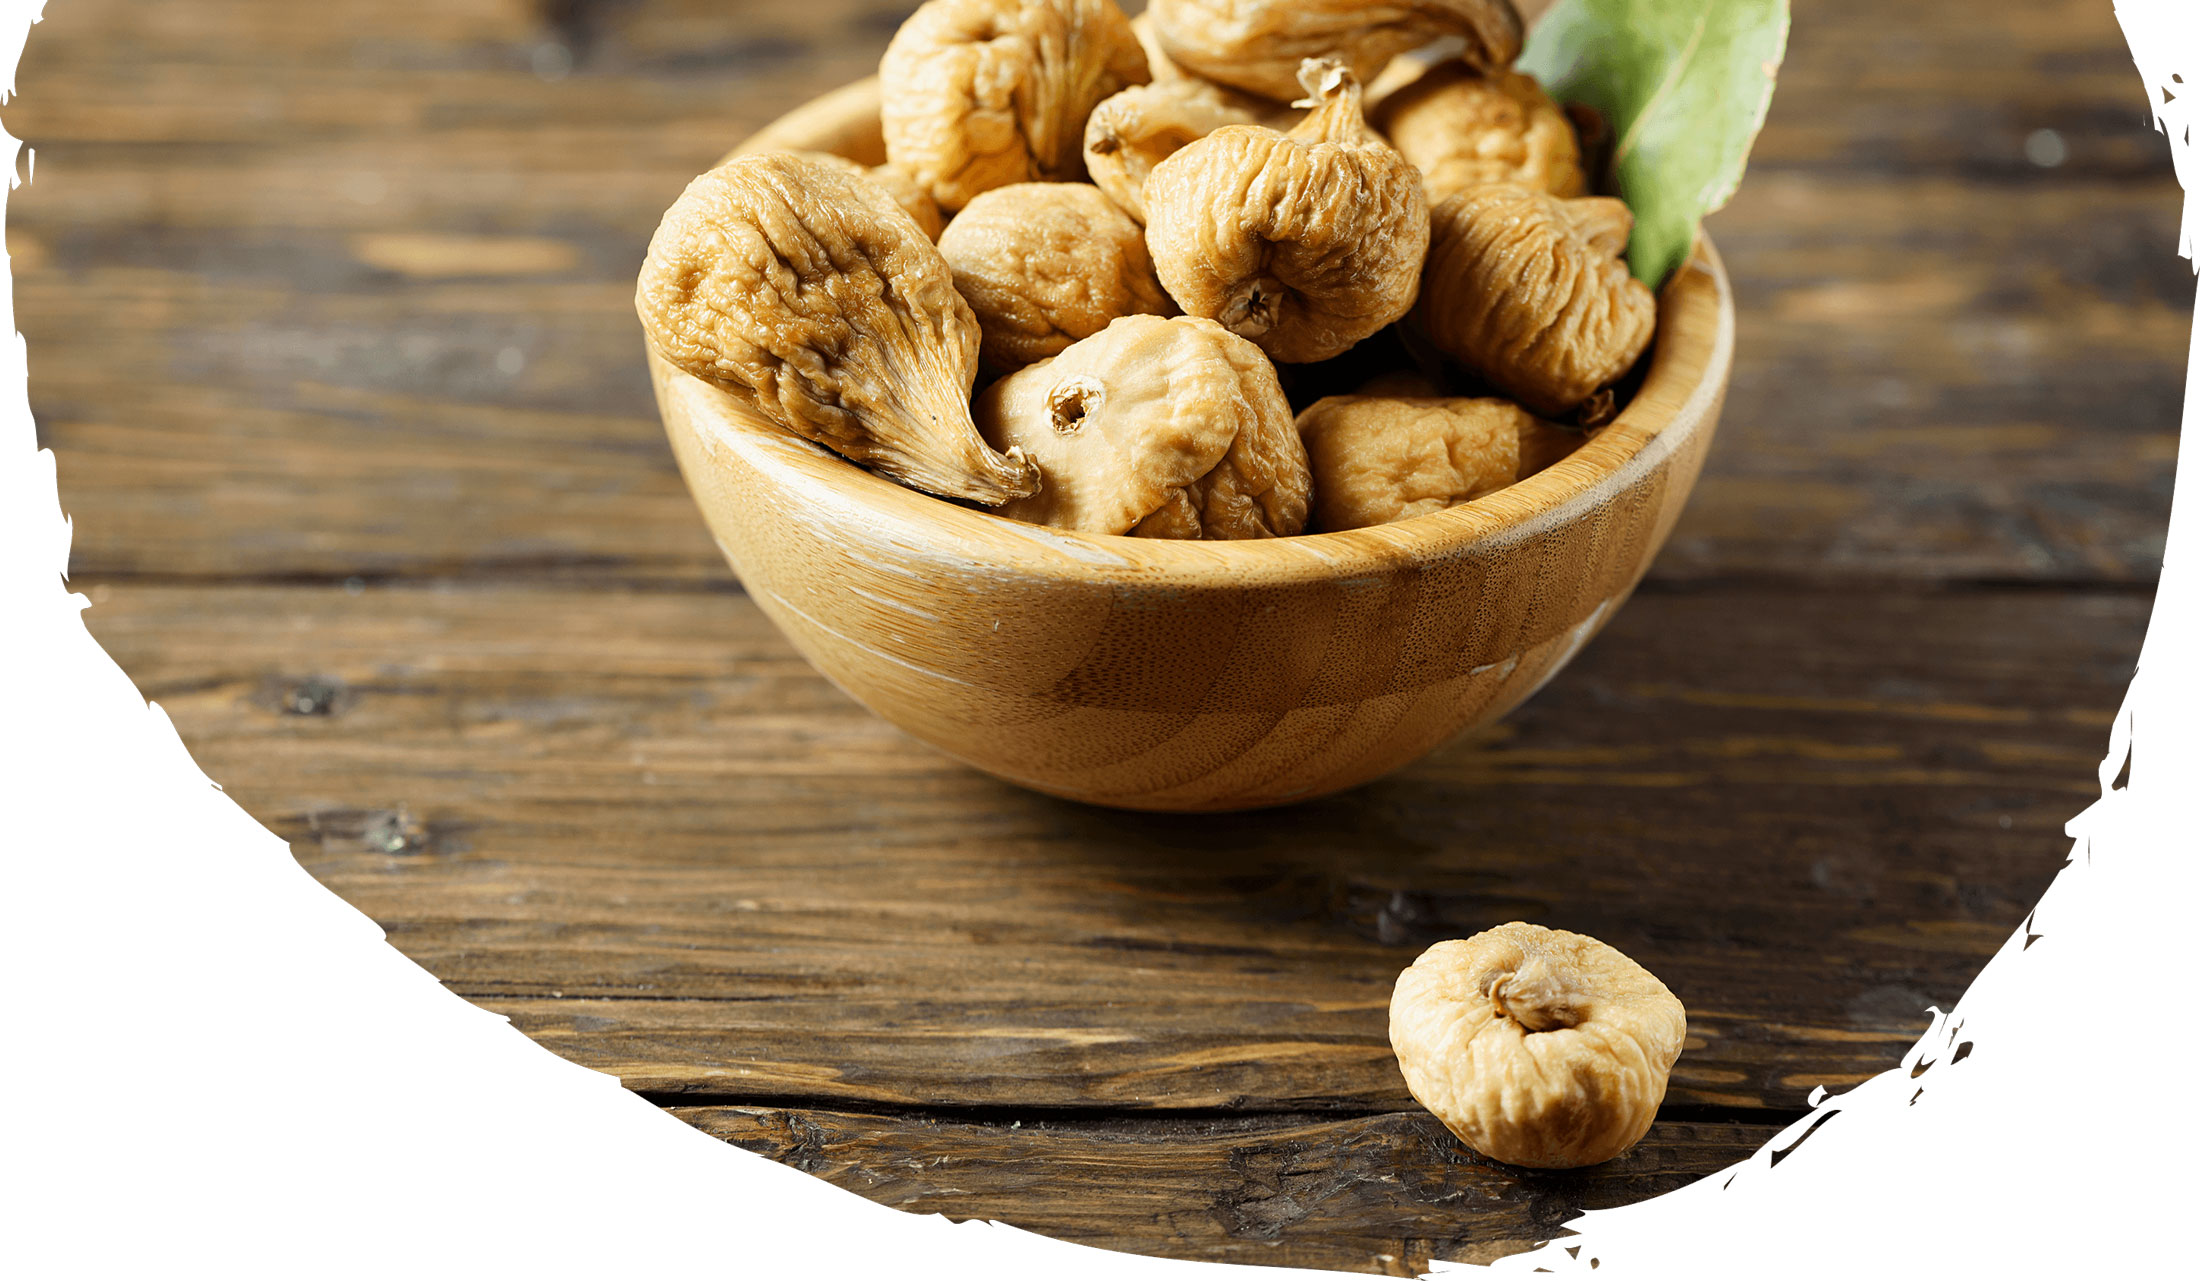 What are the benefits of dried figs?